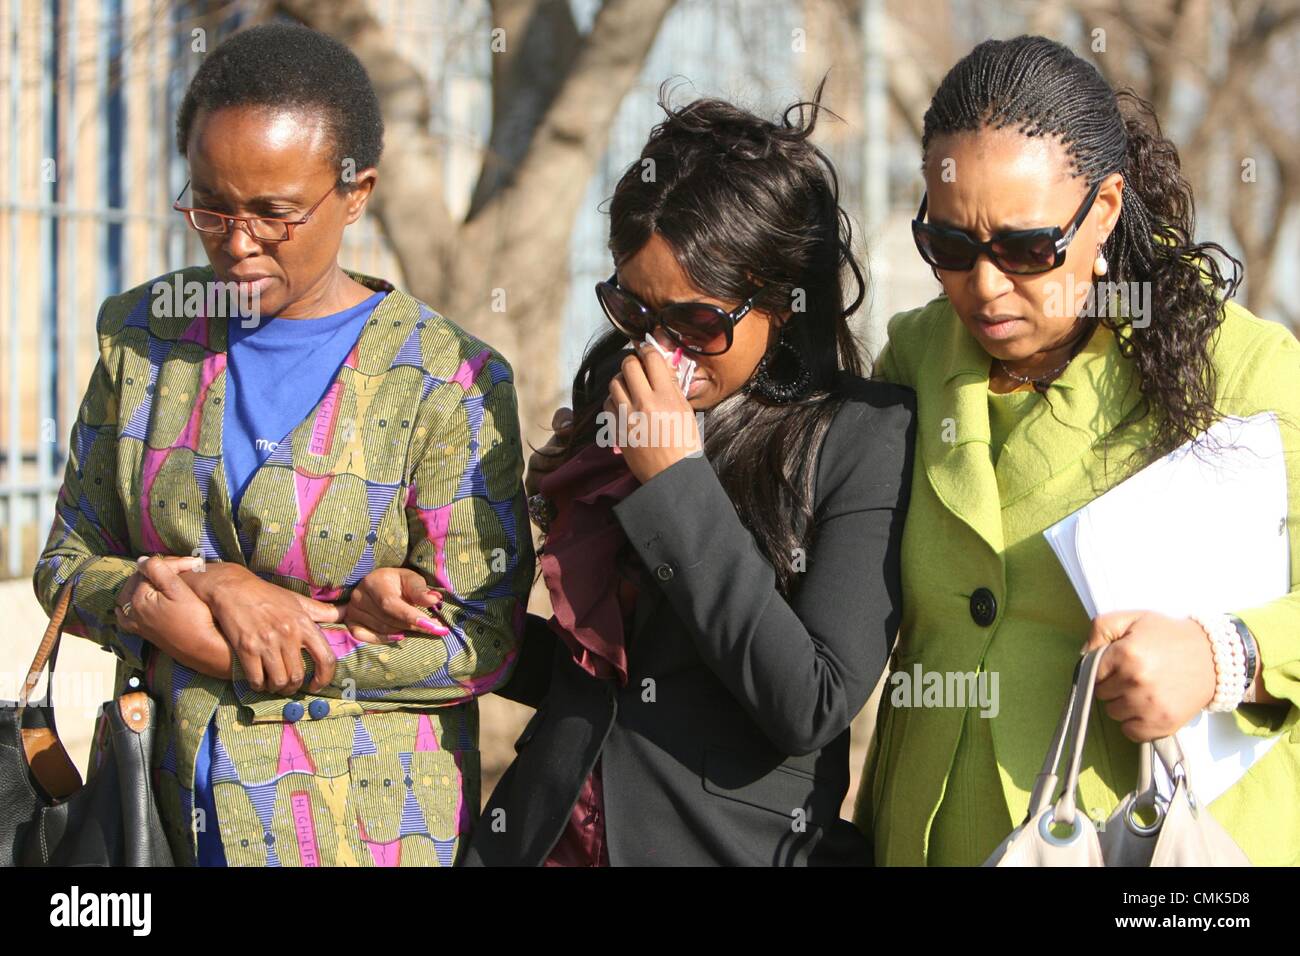 JOHANNESBURG, SOUTH AFRICA: Zenani Mandela (R) comforts her daughter Zoleka Mandela (C) outside the Johannesburg Magistrates Court on August 20, 2012 in Johannesburg, South Africa. They attended the trial of Sizwe Mankazana who is charged with murder, attempted murder and negligent driving after Nelson Mandela’s great-granddaughter Zenani Mandela was killed in a car crash. (Photo by Gallo Images / Sowetan / Mabuti Kali) Stock Photo